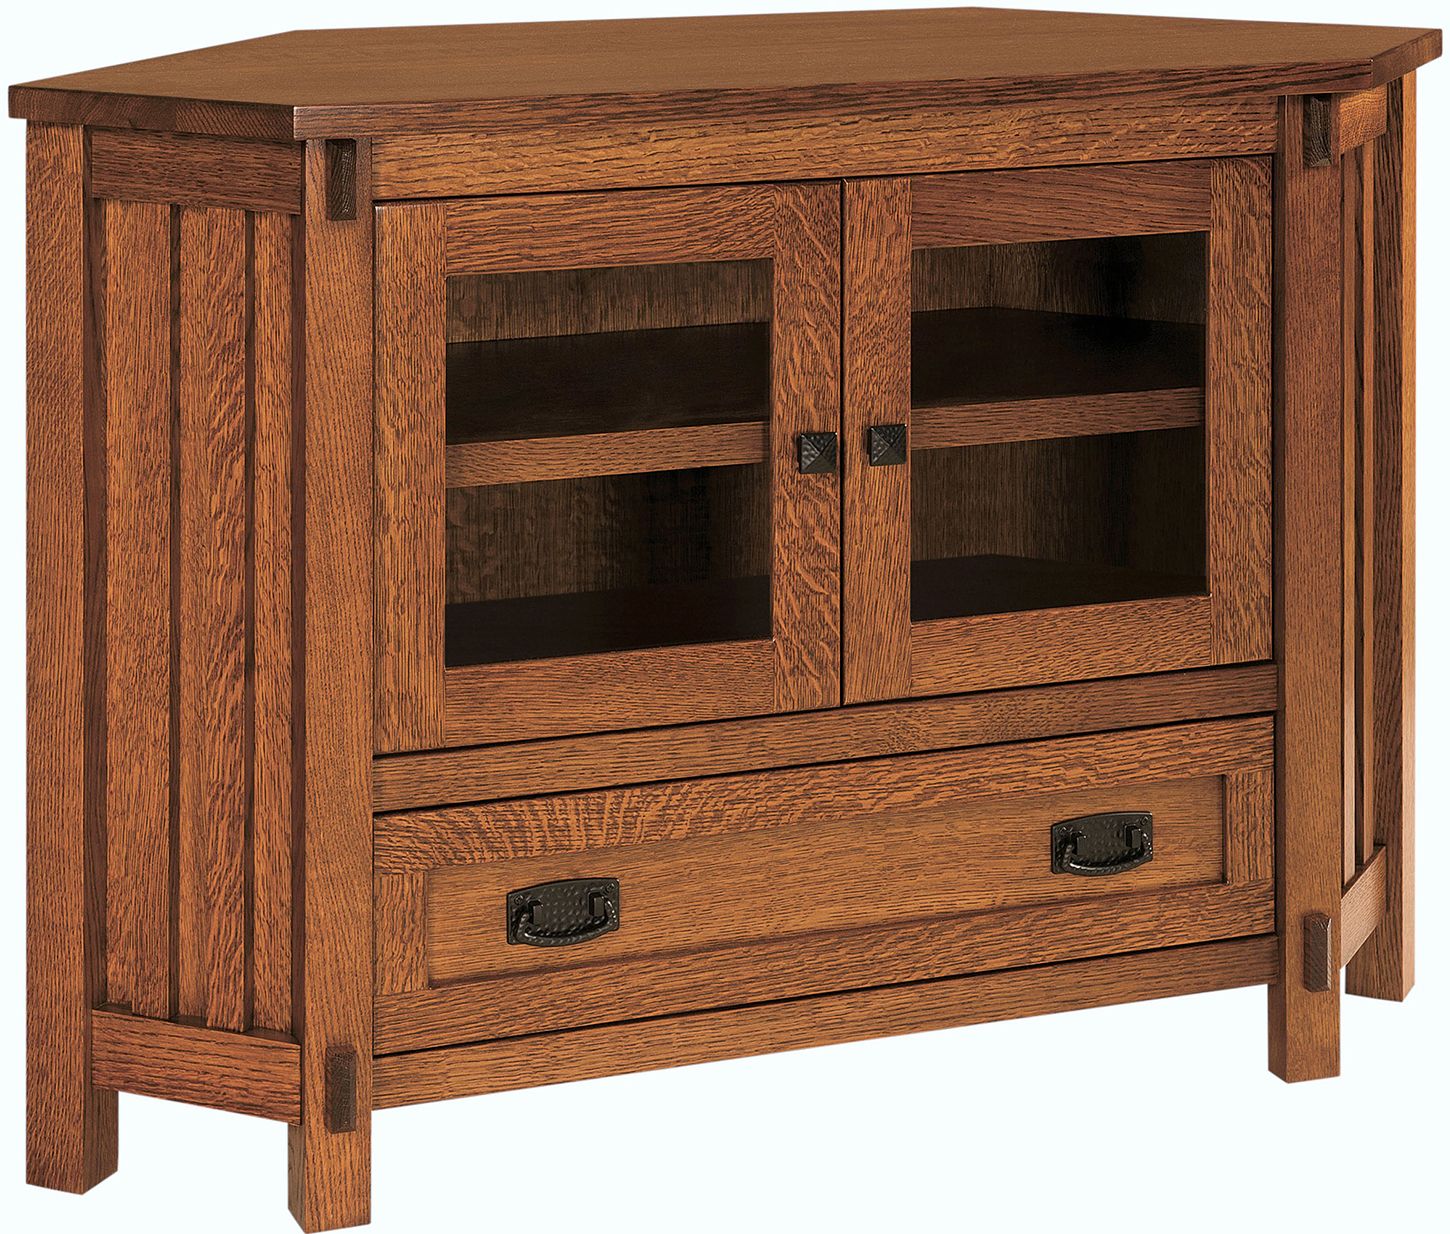 Rio Mission Small Corner Tv Cabinet | Rio Mission Wood Within Small Tv Stands (View 10 of 15)